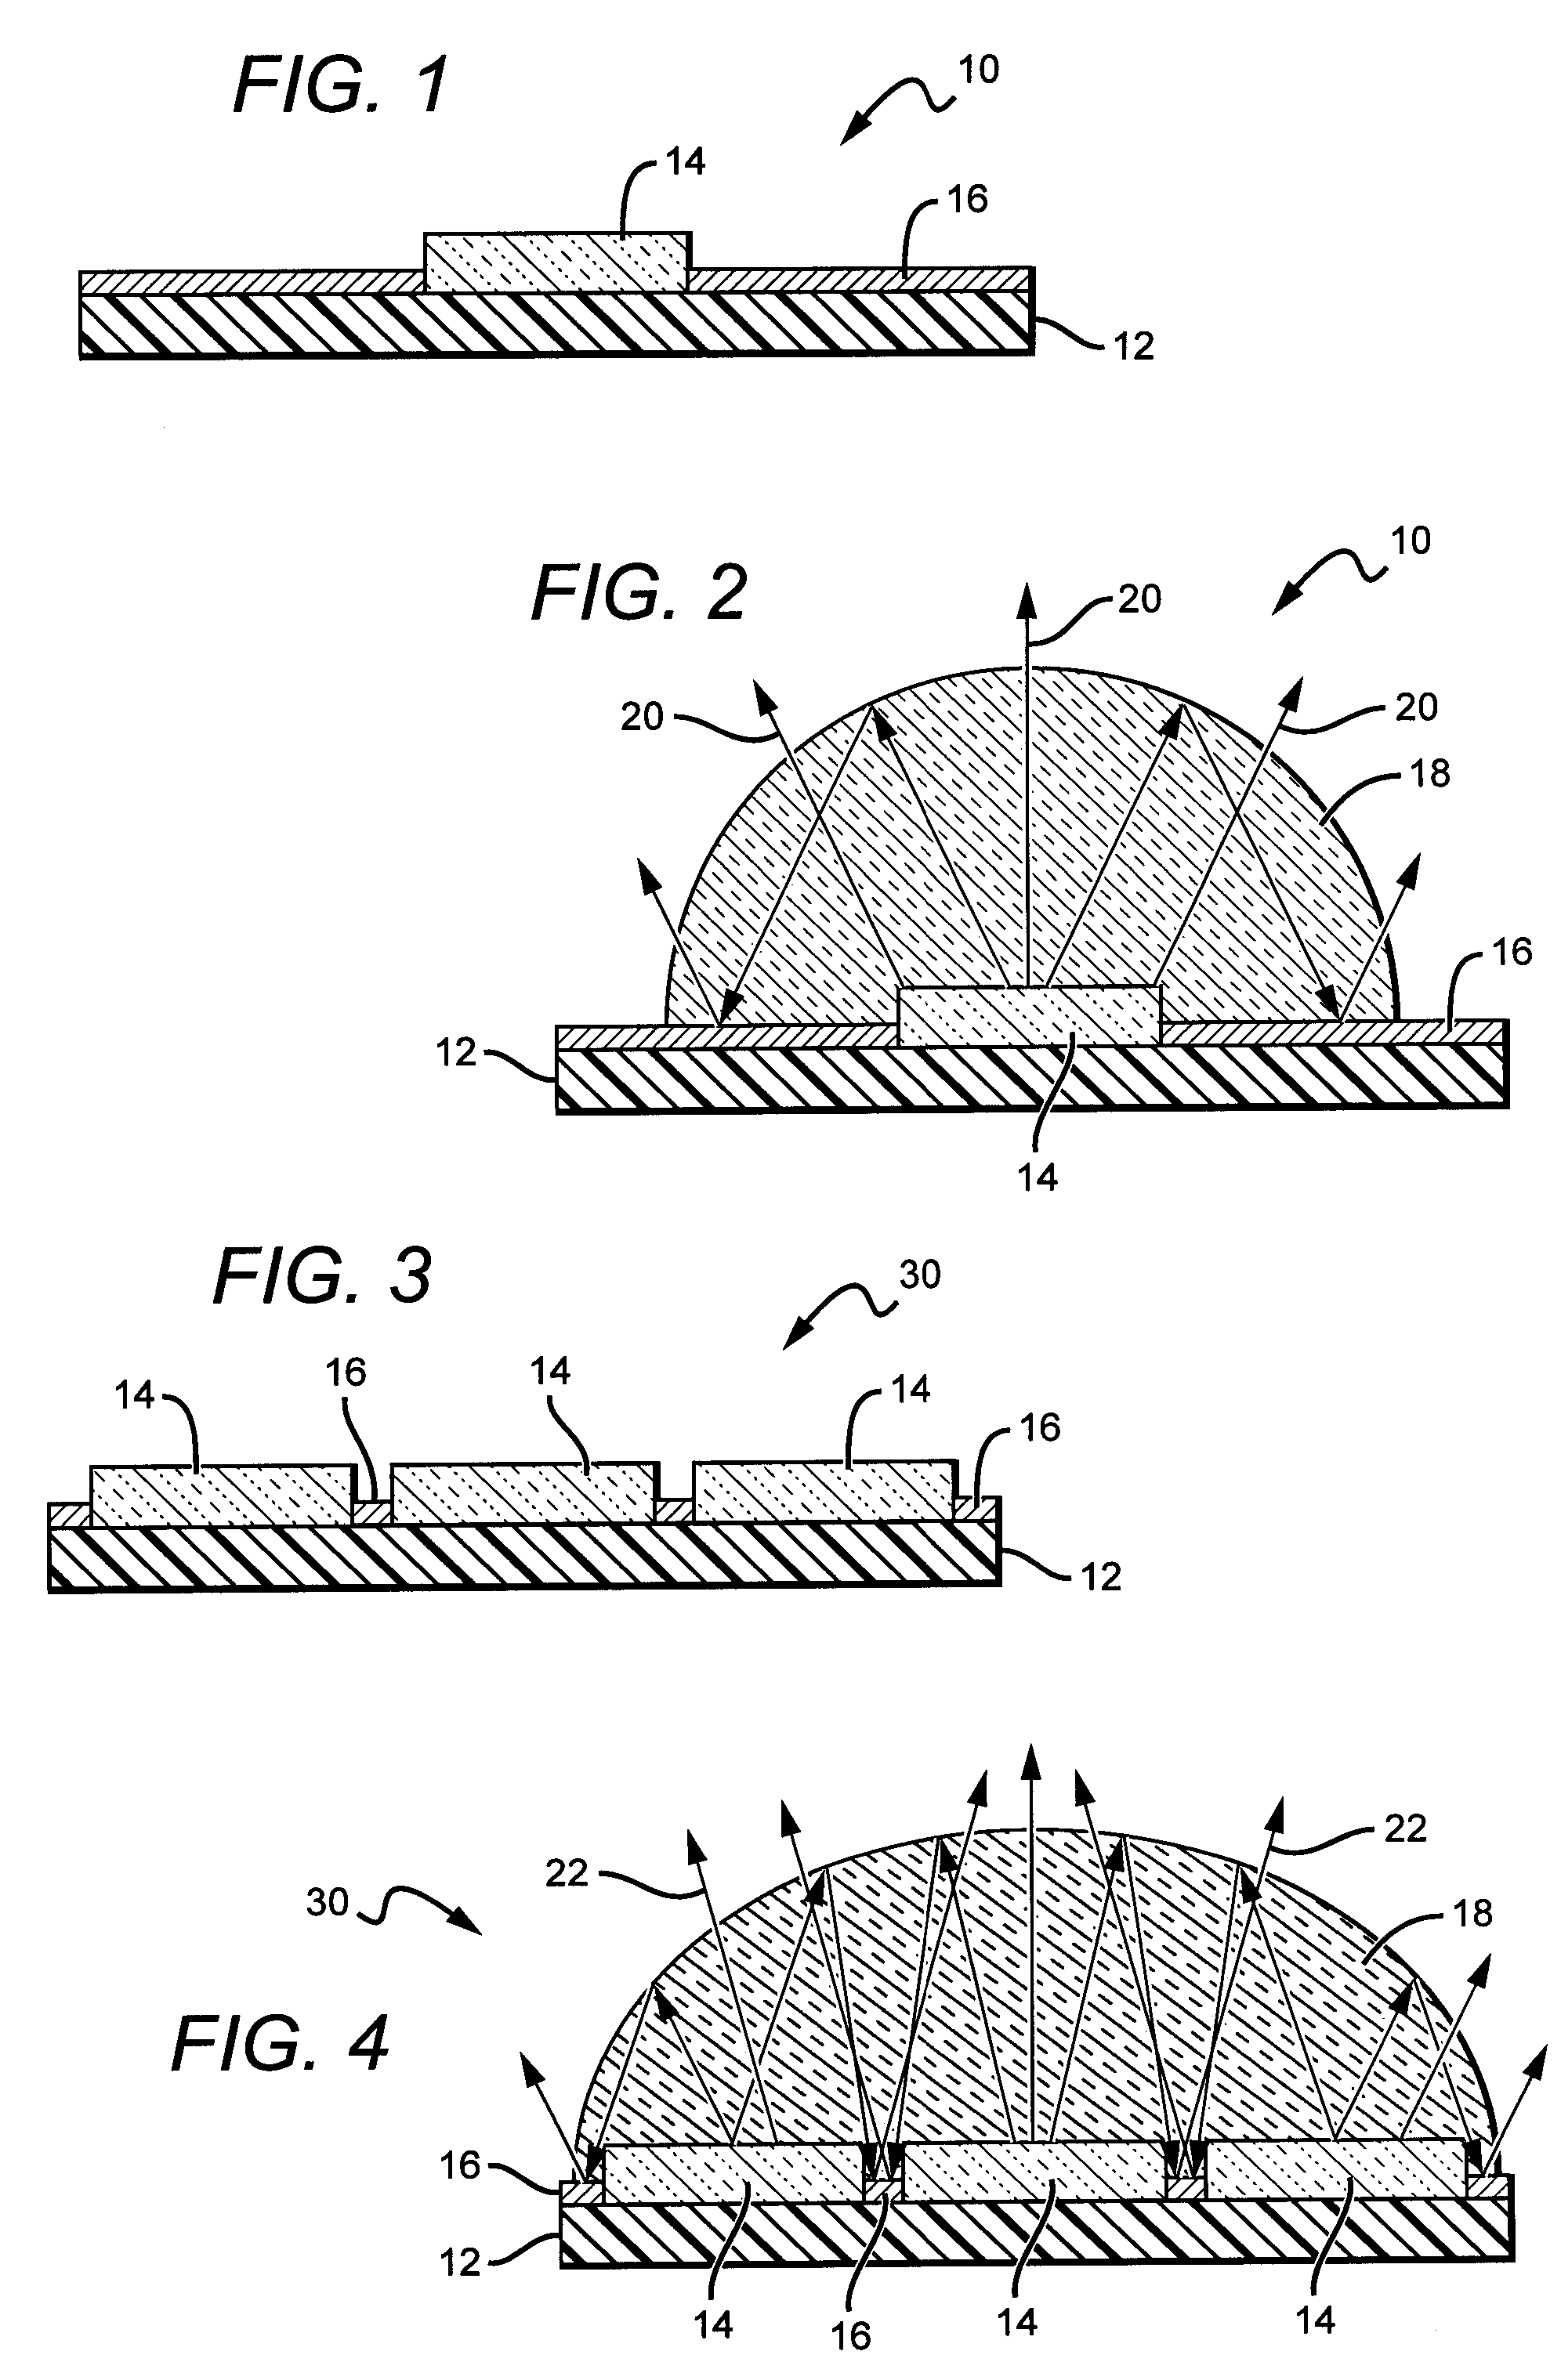 High reflective substrate of light emitting devices with improved light outpput